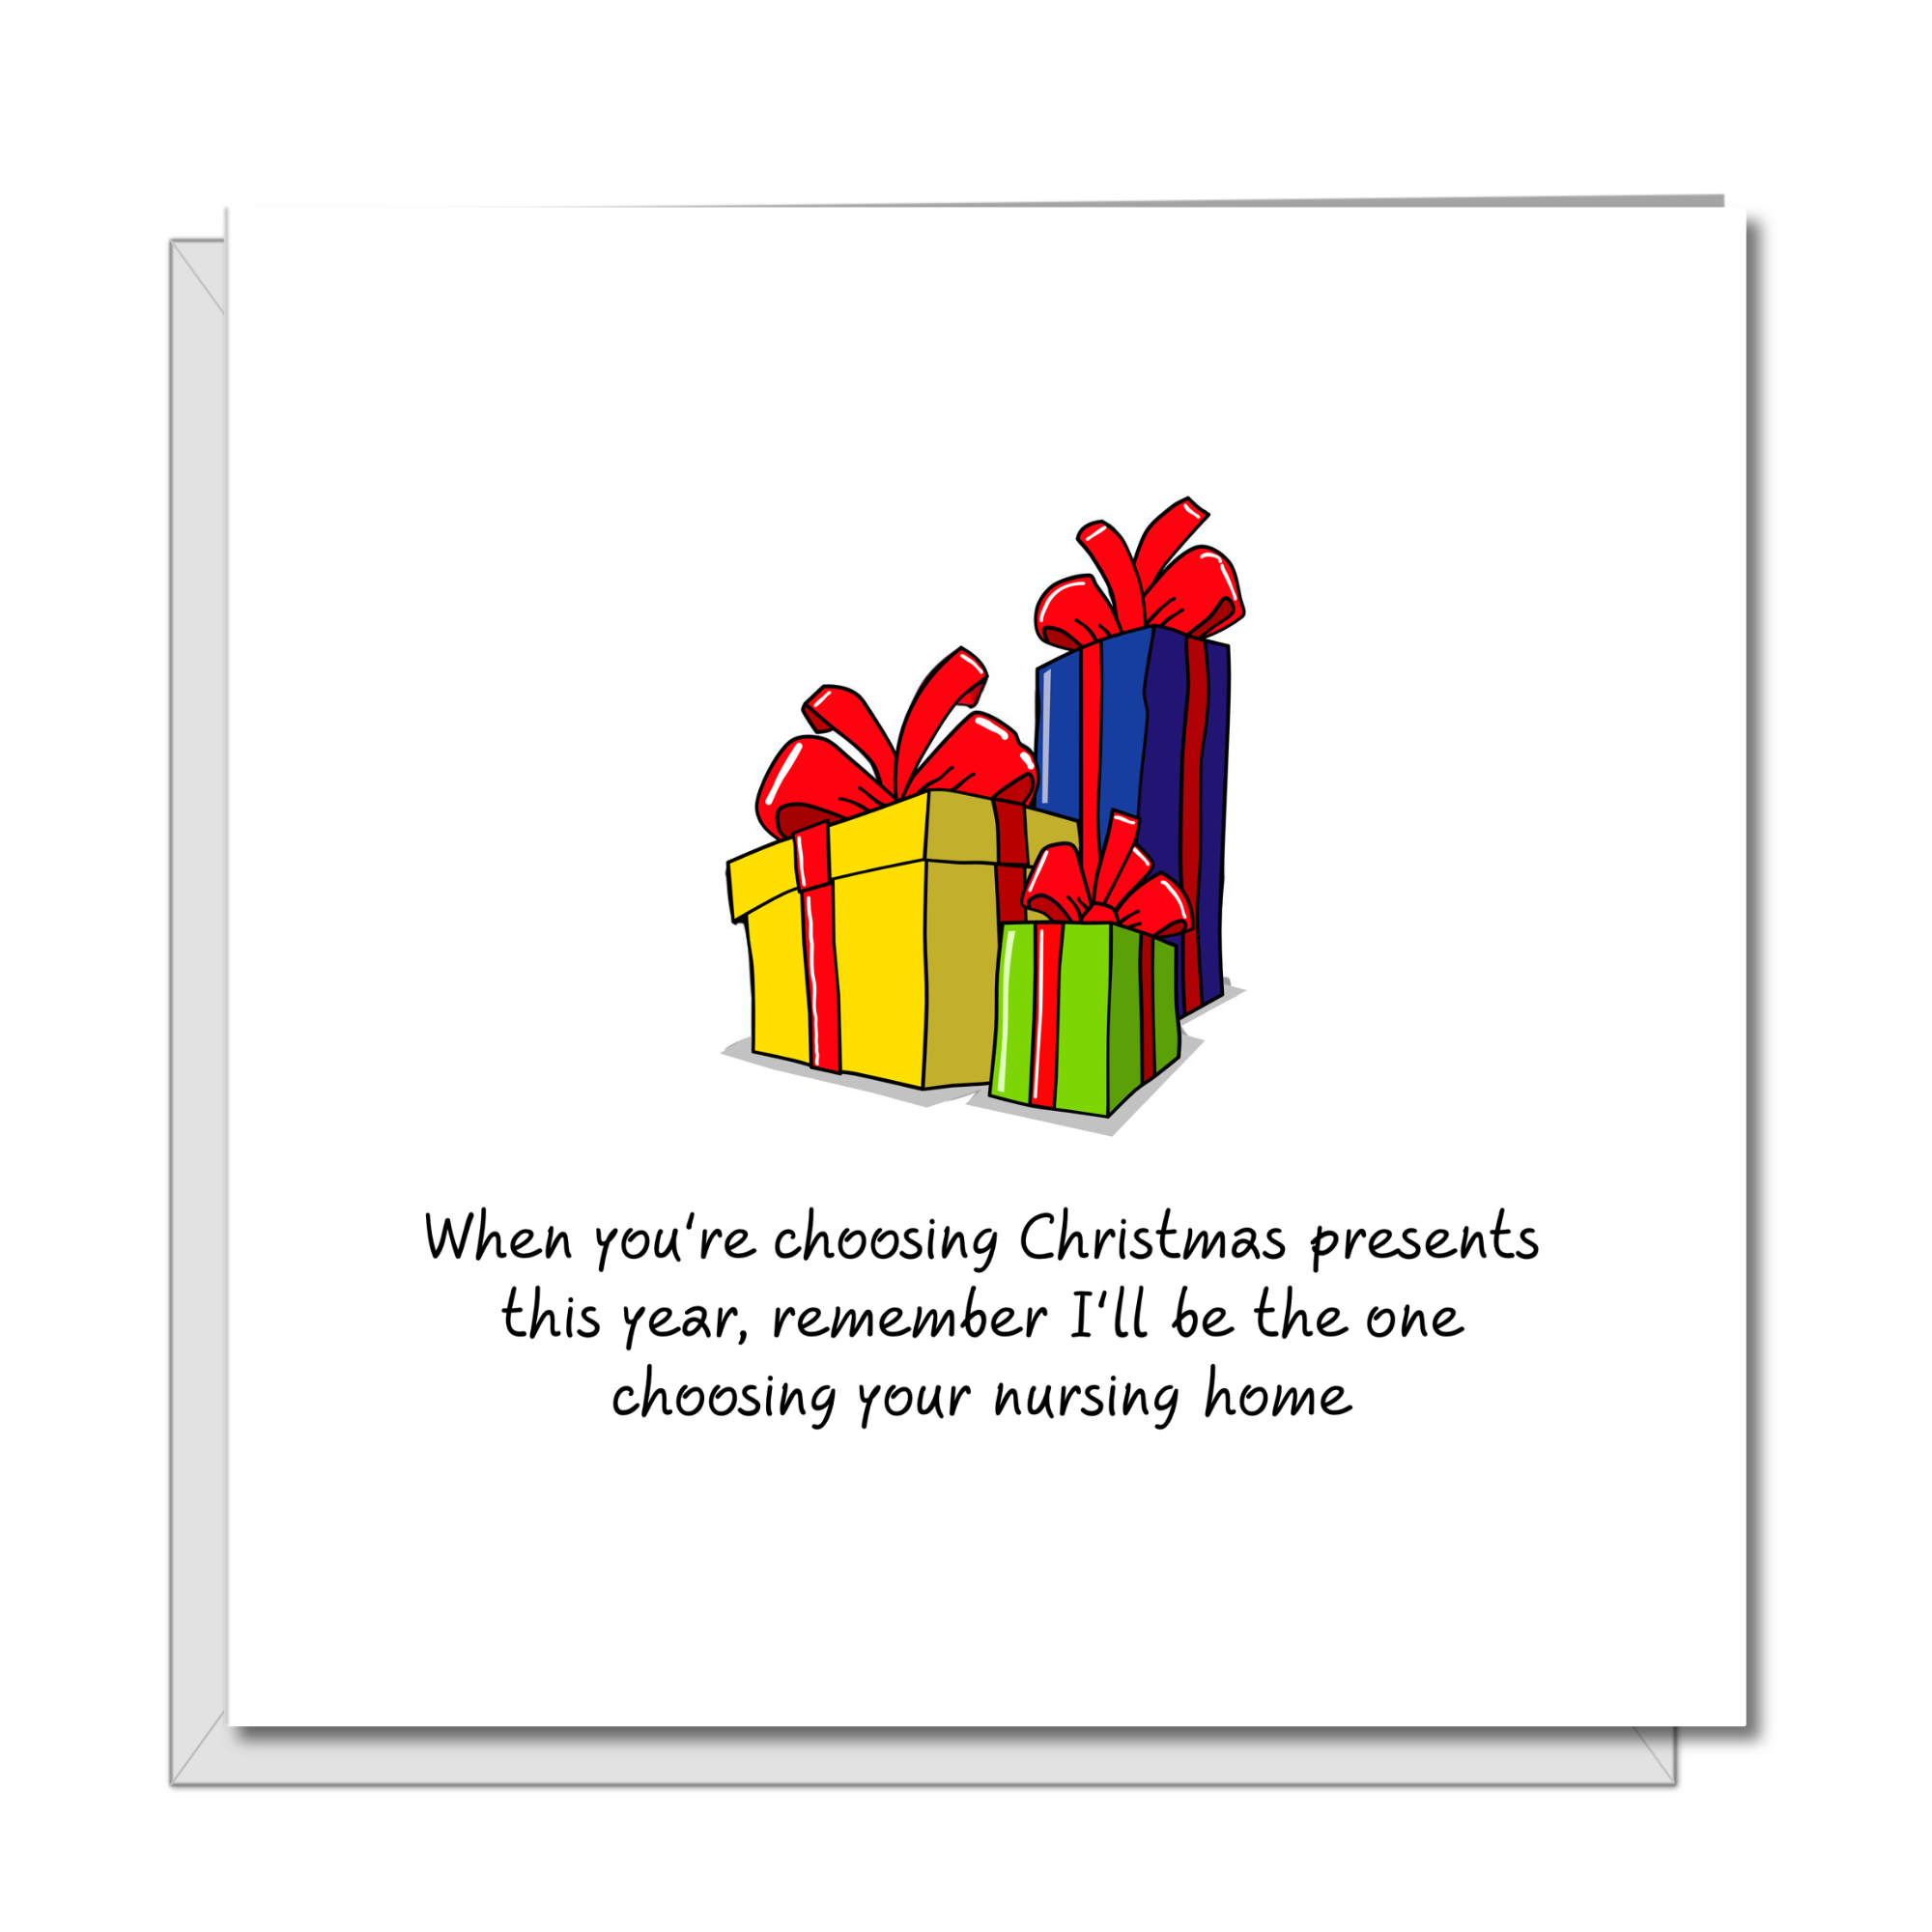 Funny Christmas Card for Mum, Dad, Parents - choosing presents or gifts - humorous amusing xmas card - adult rude and fun